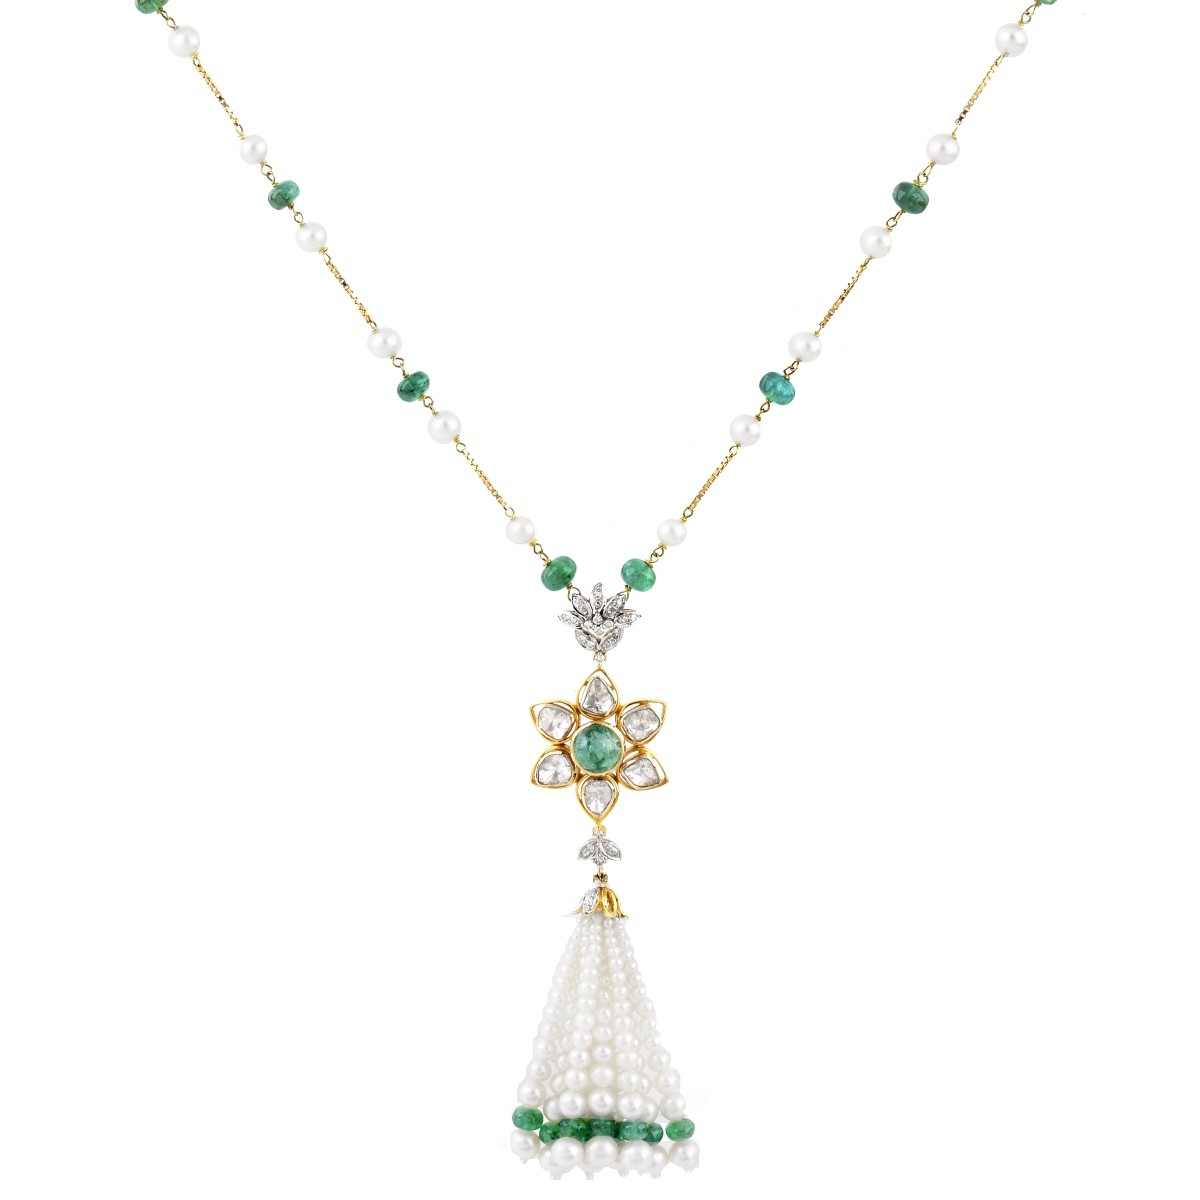 Diamond, Emerald, Pearl and 14K Necklace